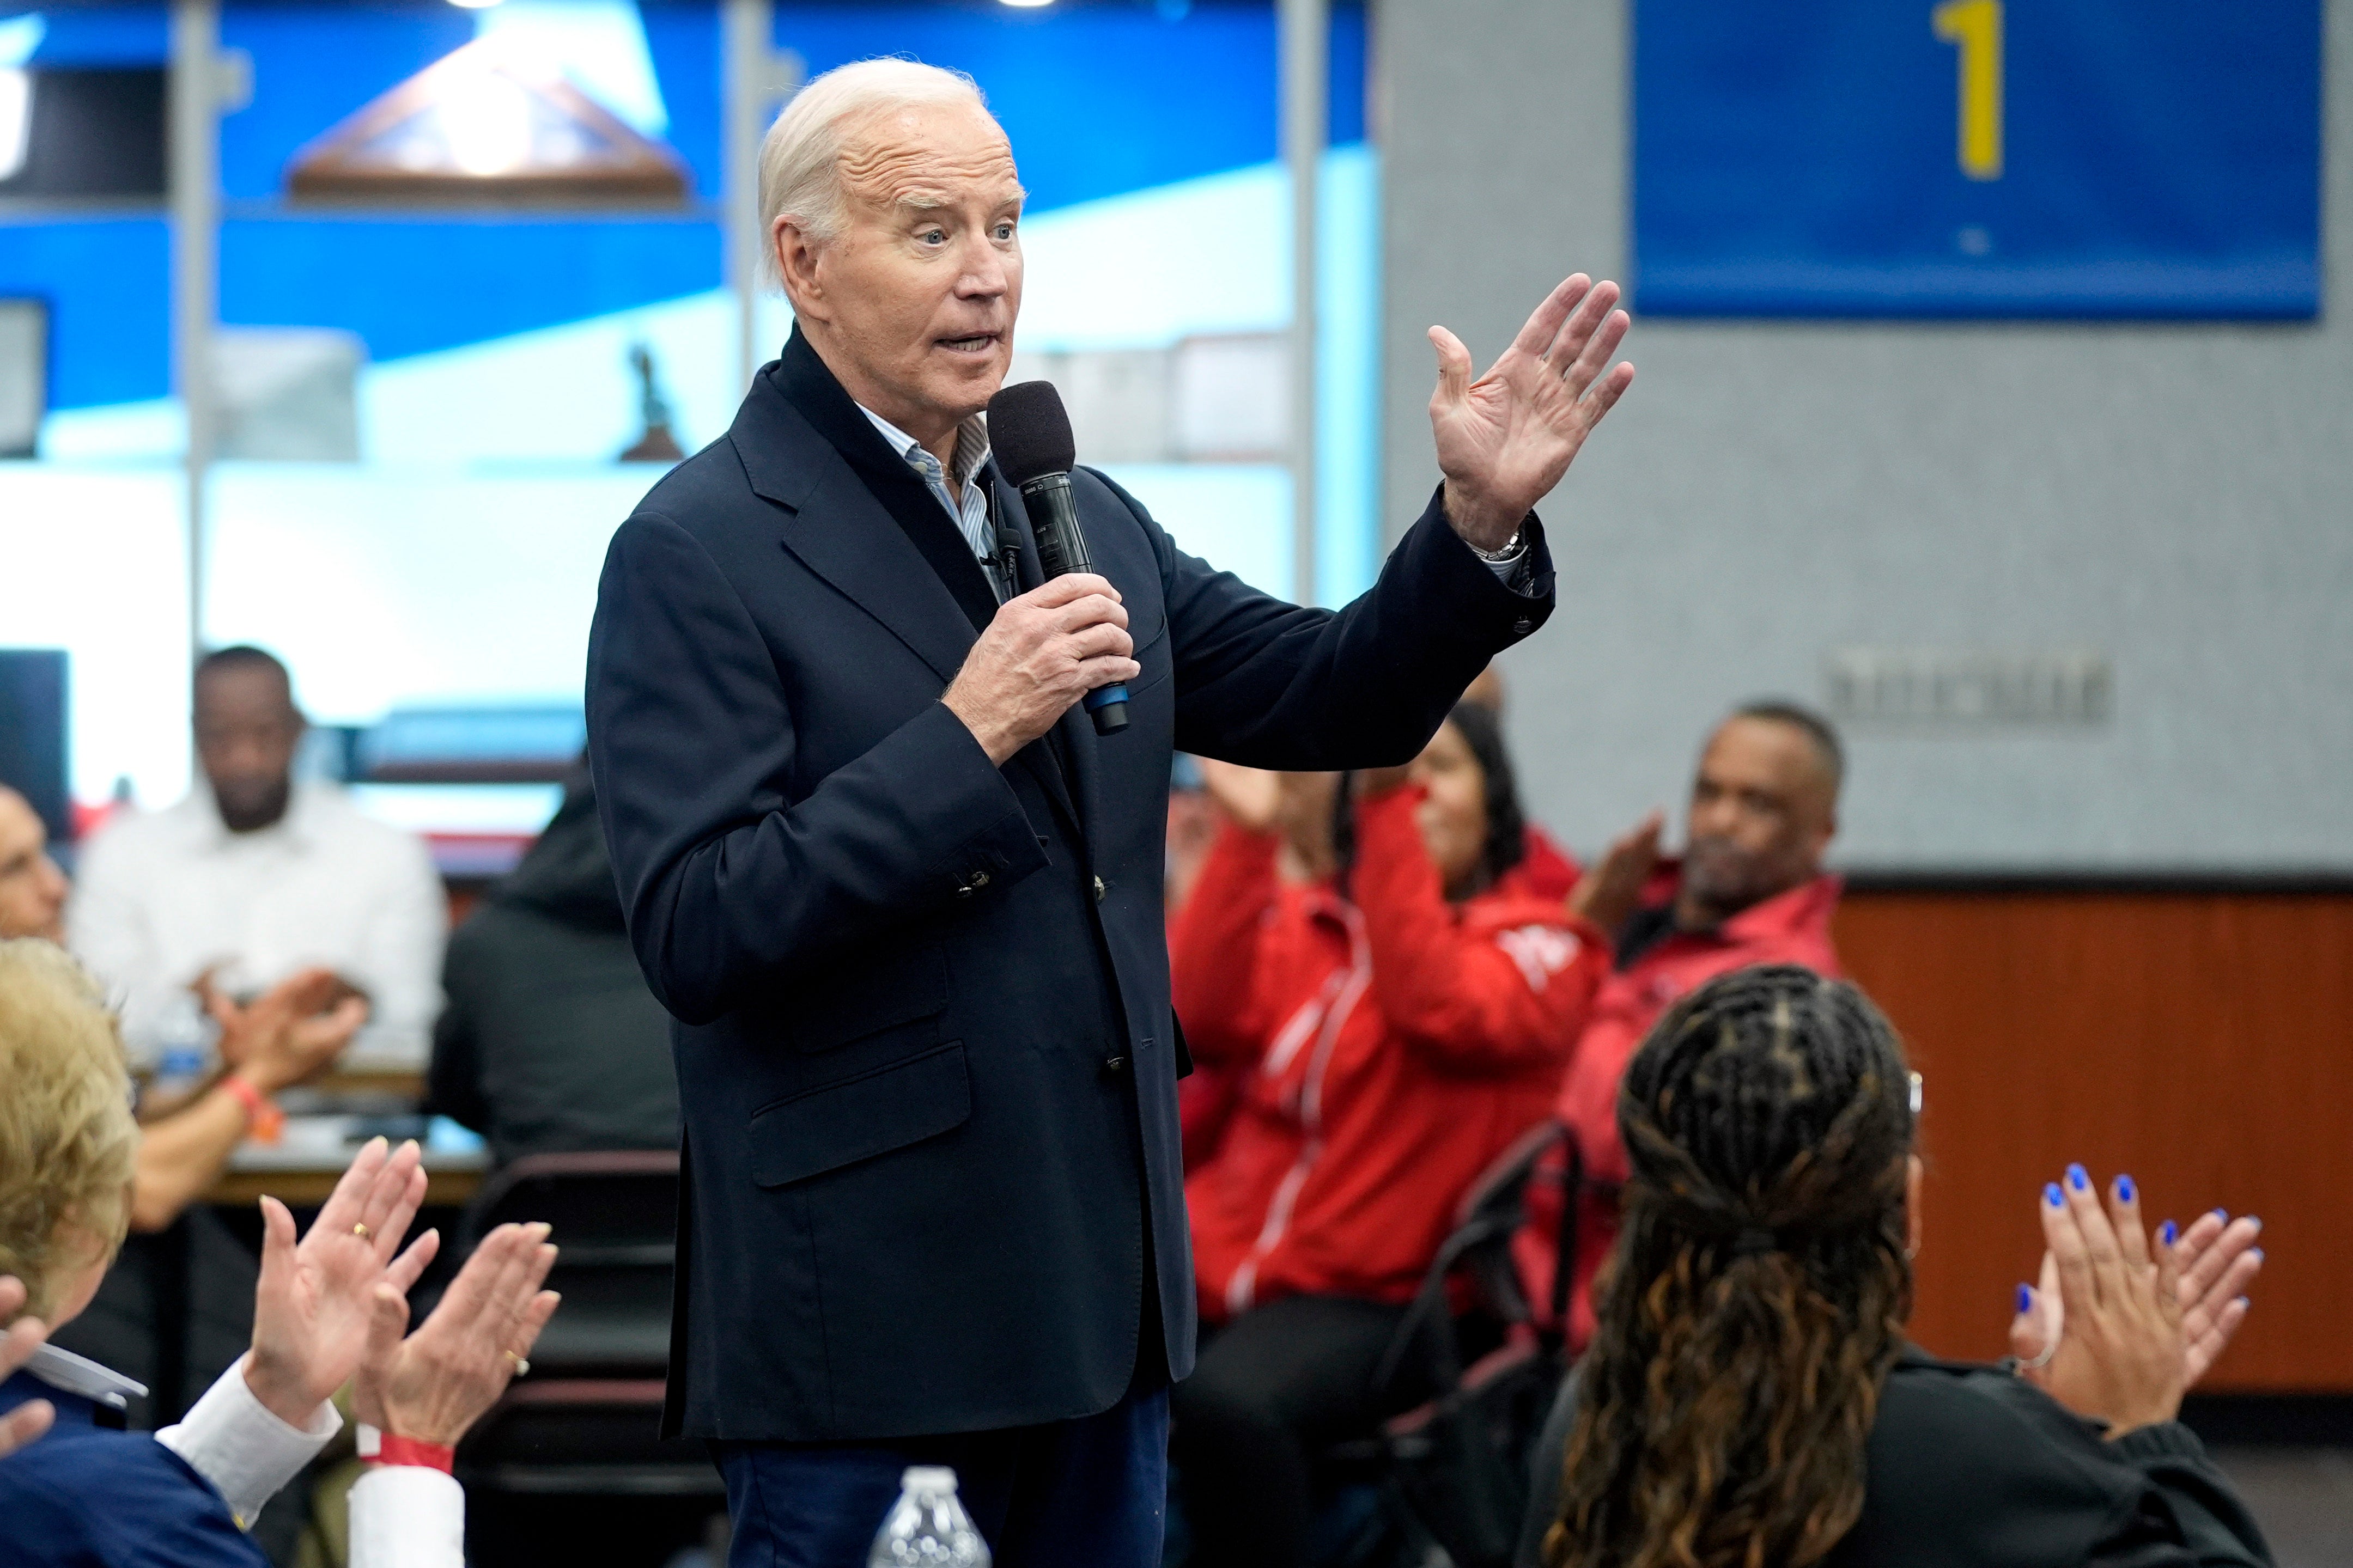 Biden’s outreach to the Black community is only just getting started, say activists